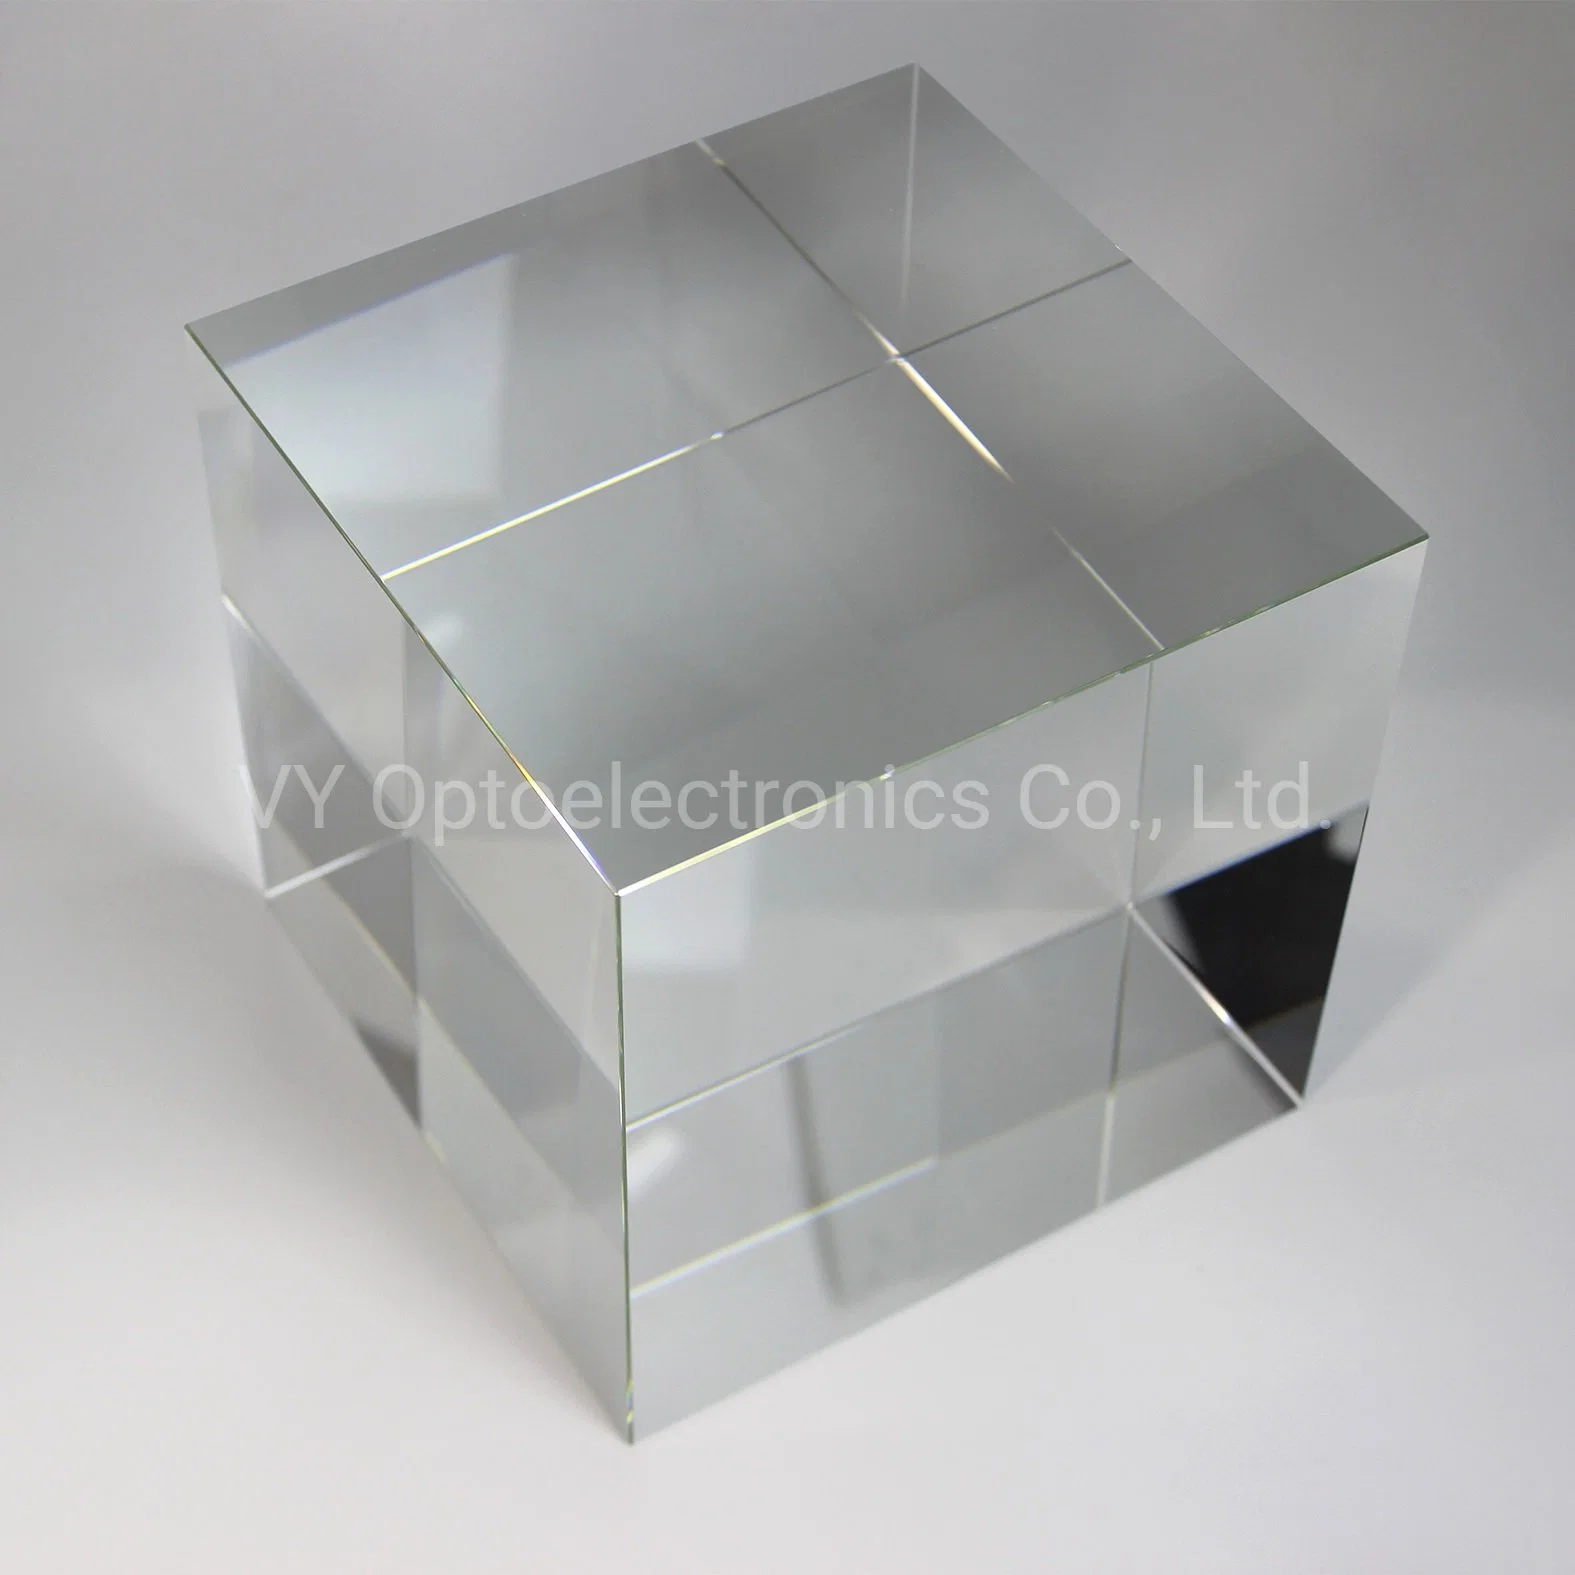 Vy Hotsale 3-500mm Optical Glass Transparent Cross Dichroic X-Cube Prism